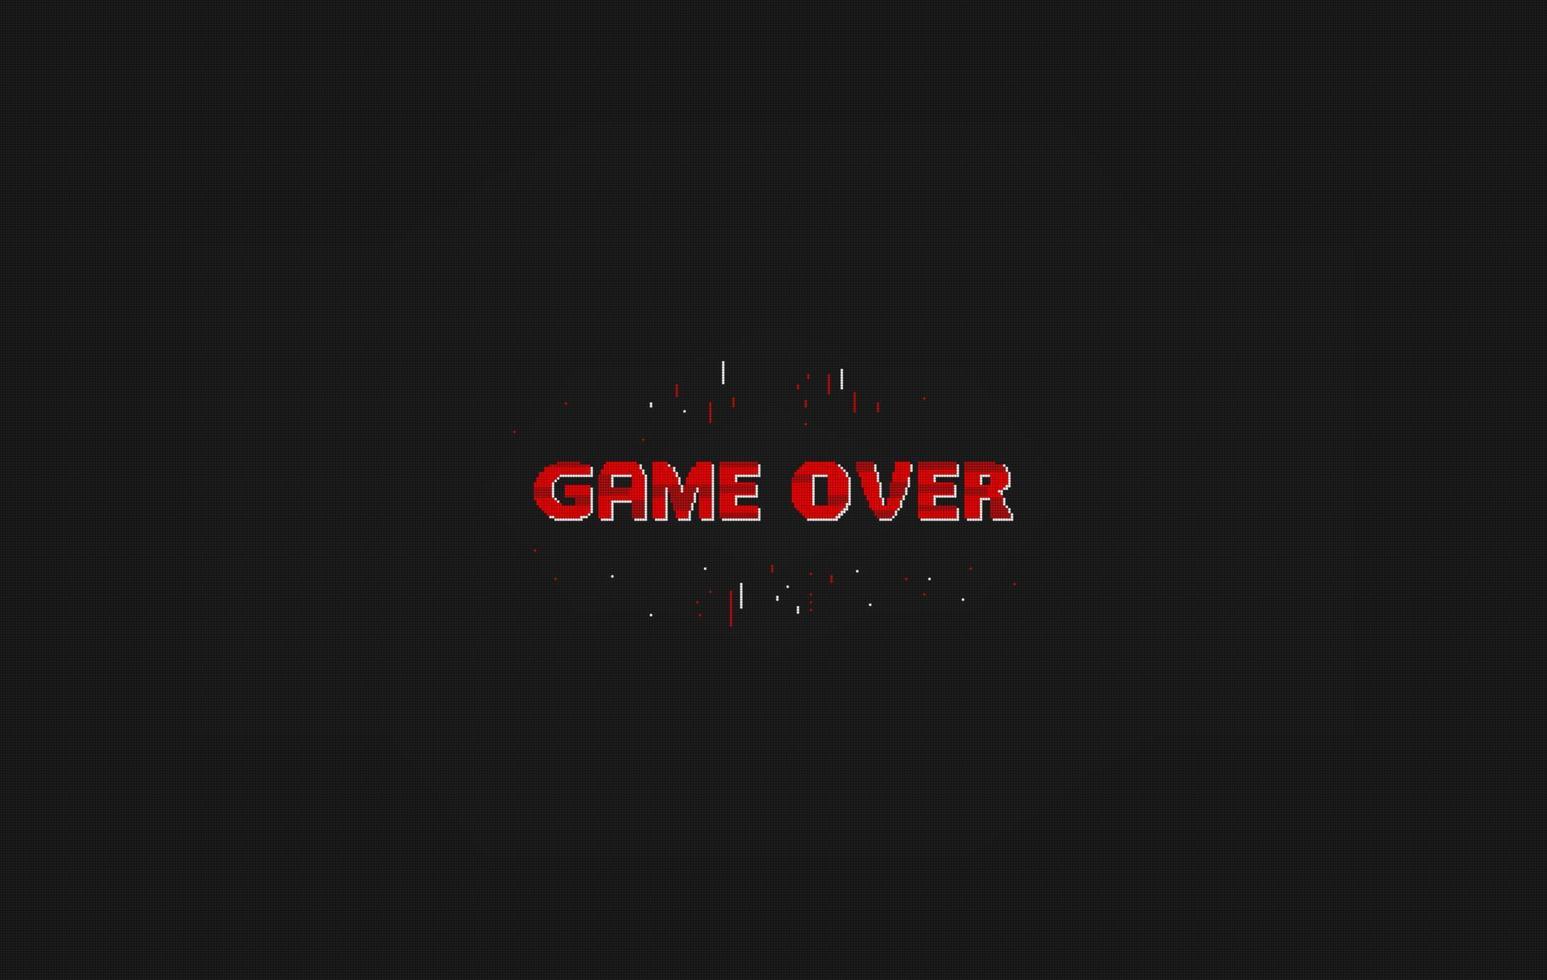 game over Pixel art design isolated on background. Pixel art for game design. vector